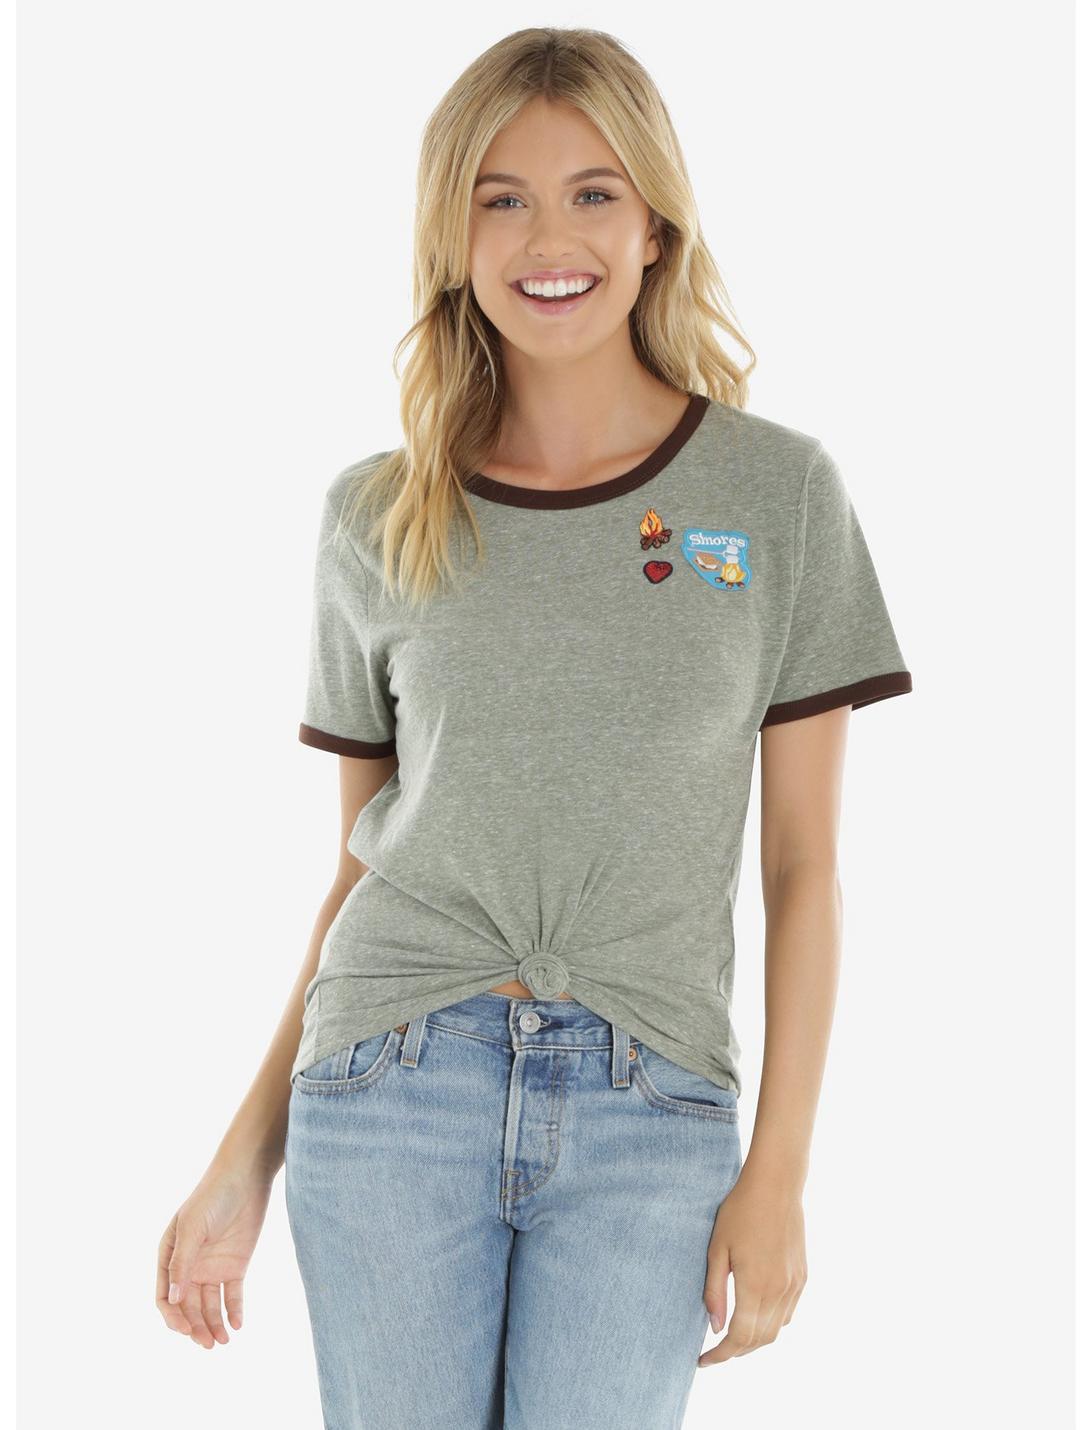 S'mores Patches Womens Ringer Tee, CHARCOAL, hi-res